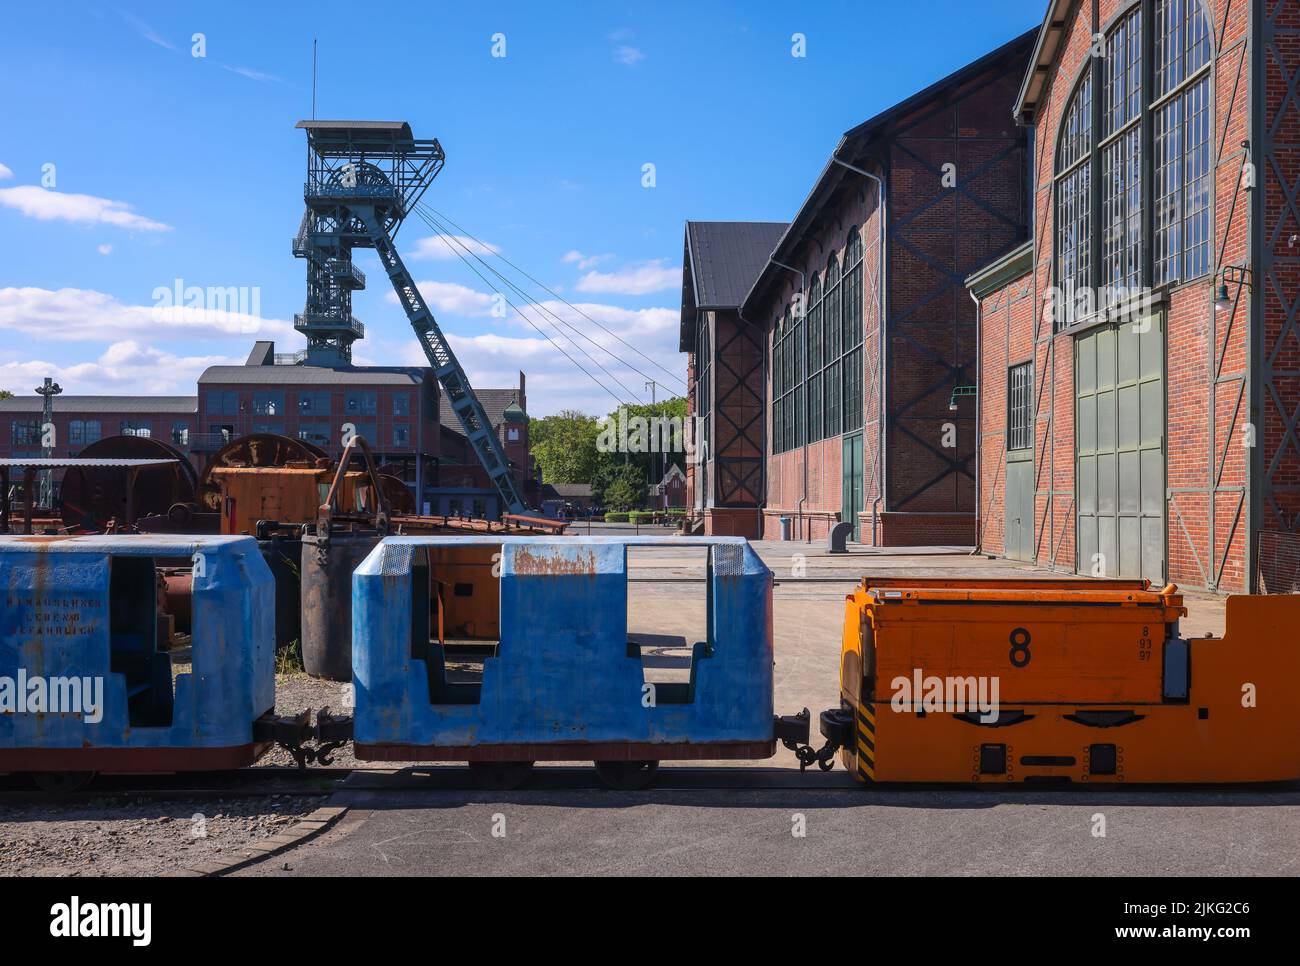 22.04.2022, Germany, North Rhine-Westphalia, Dortmund - LWL Industrial Museum Zollern Colliery. Zollern Colliery is a disused coal mine in the northwe Stock Photo